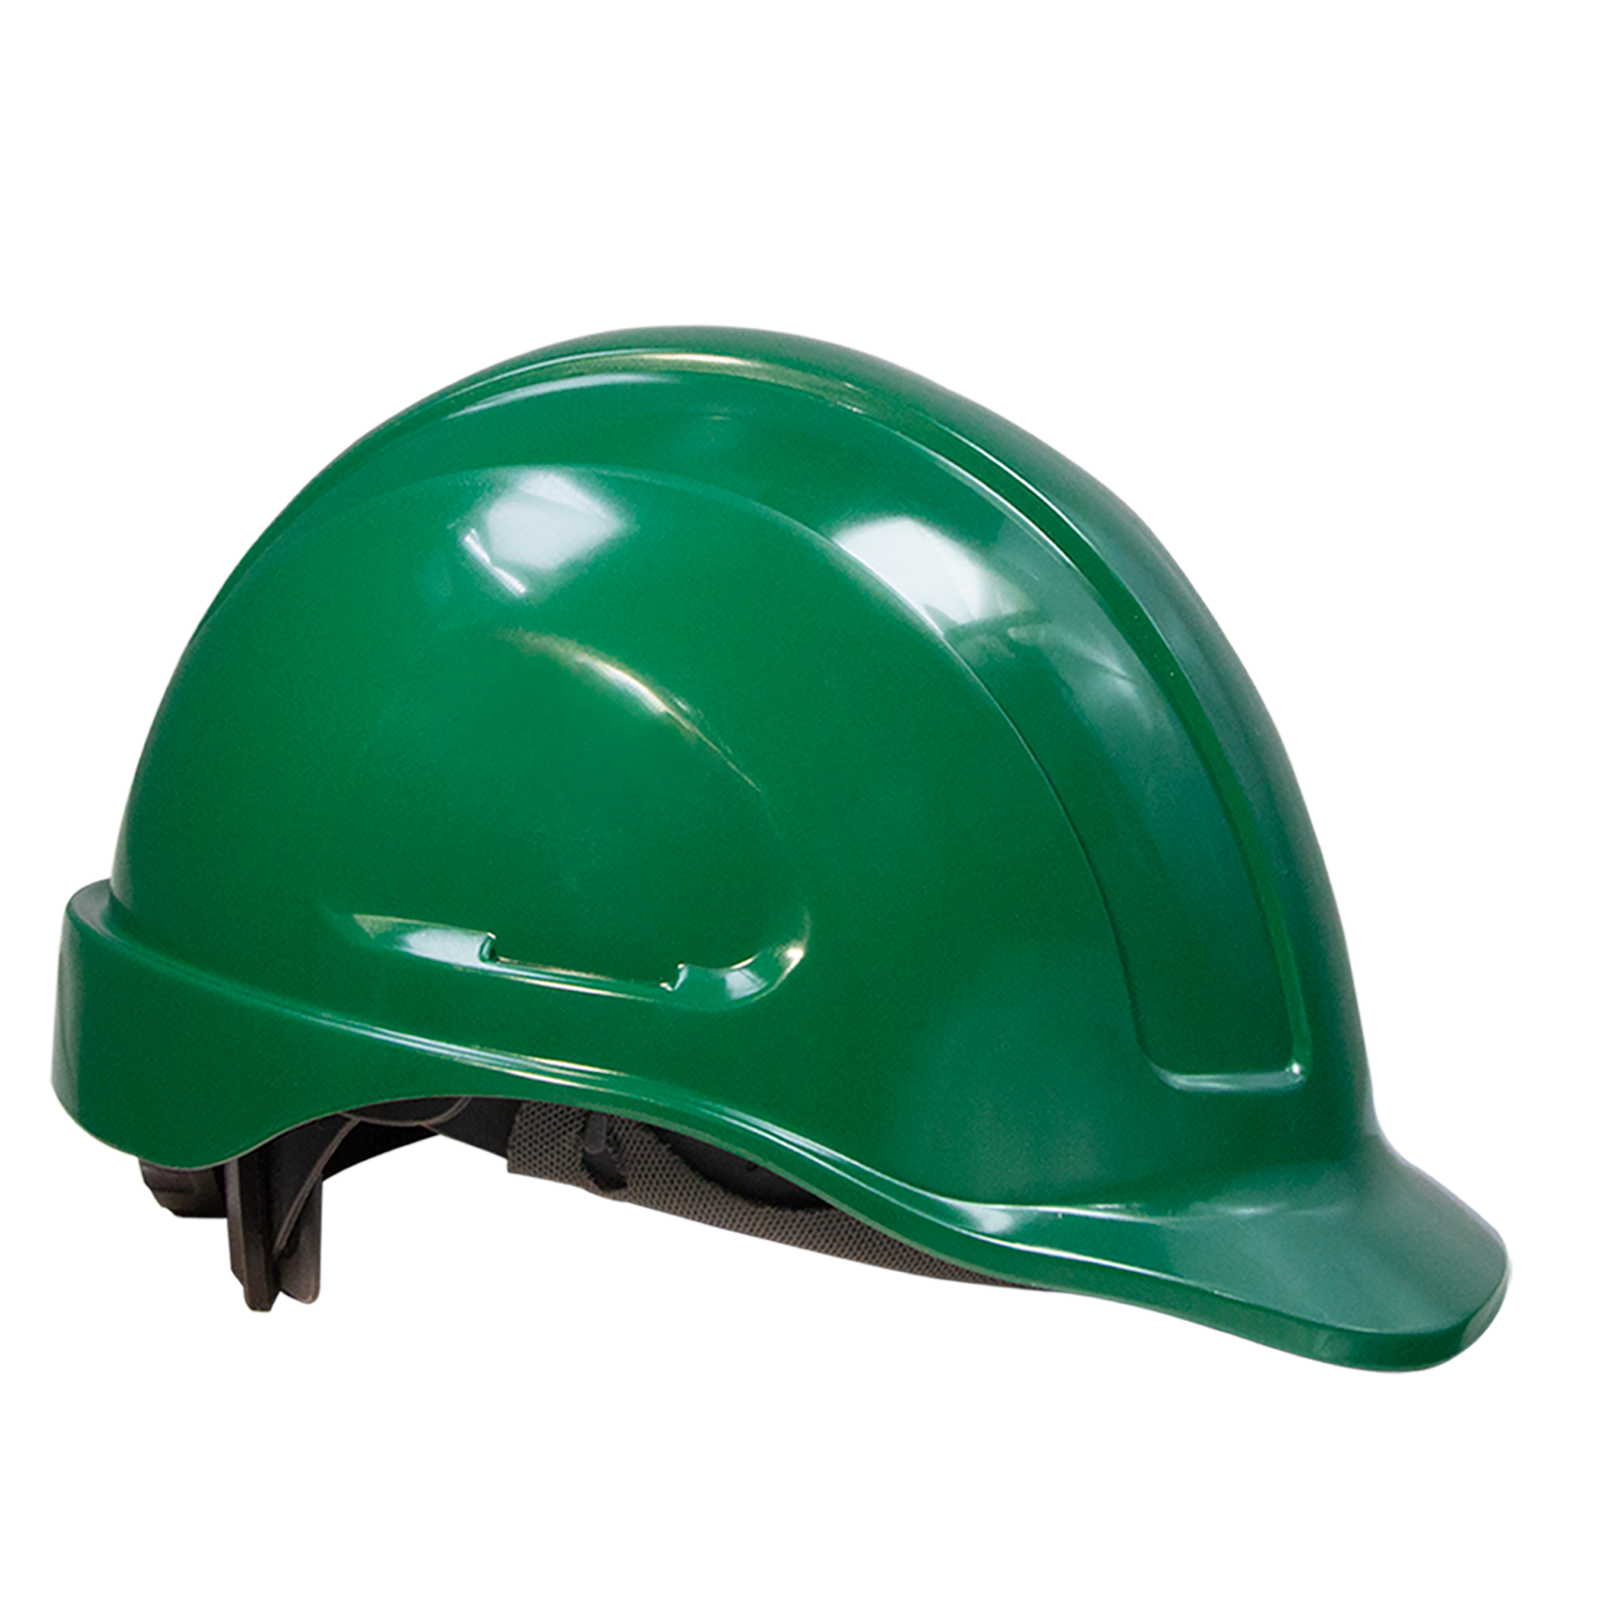 ANSI Compliant Cap stile Hard hat for head protection from falling objects